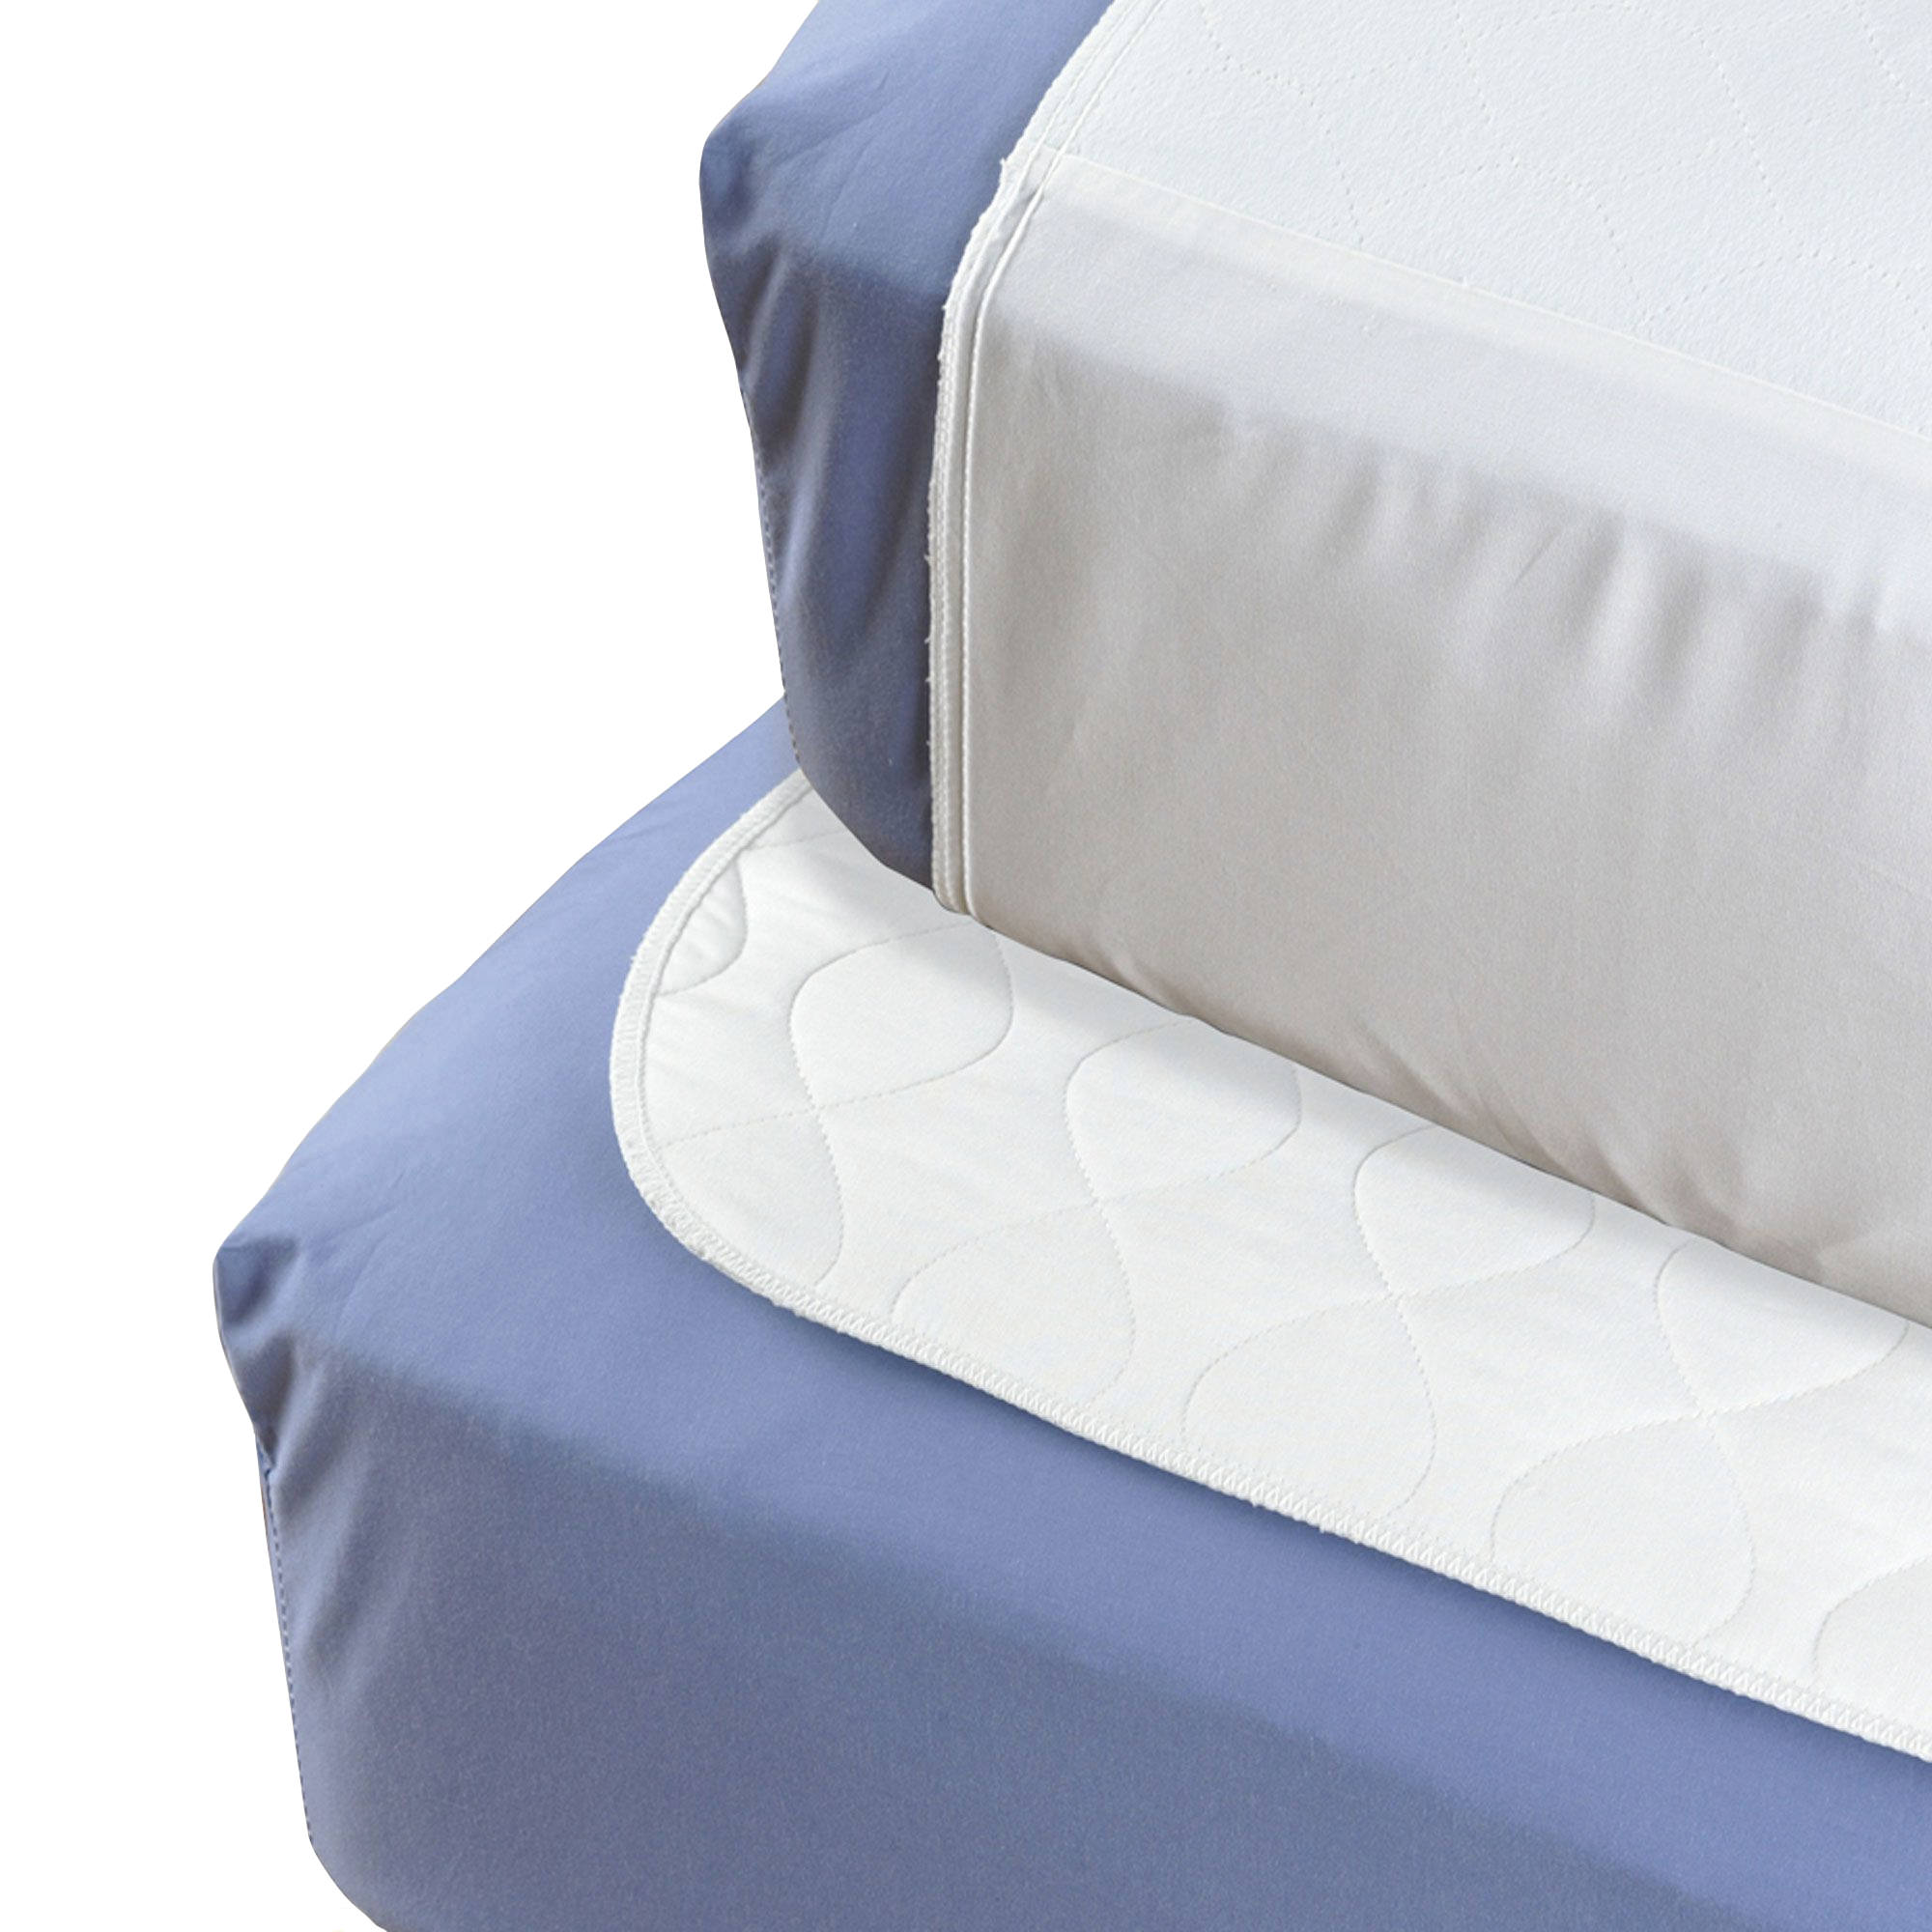 Washable Bed Protector/Pad WITHOUT Tucks - Pack of 2